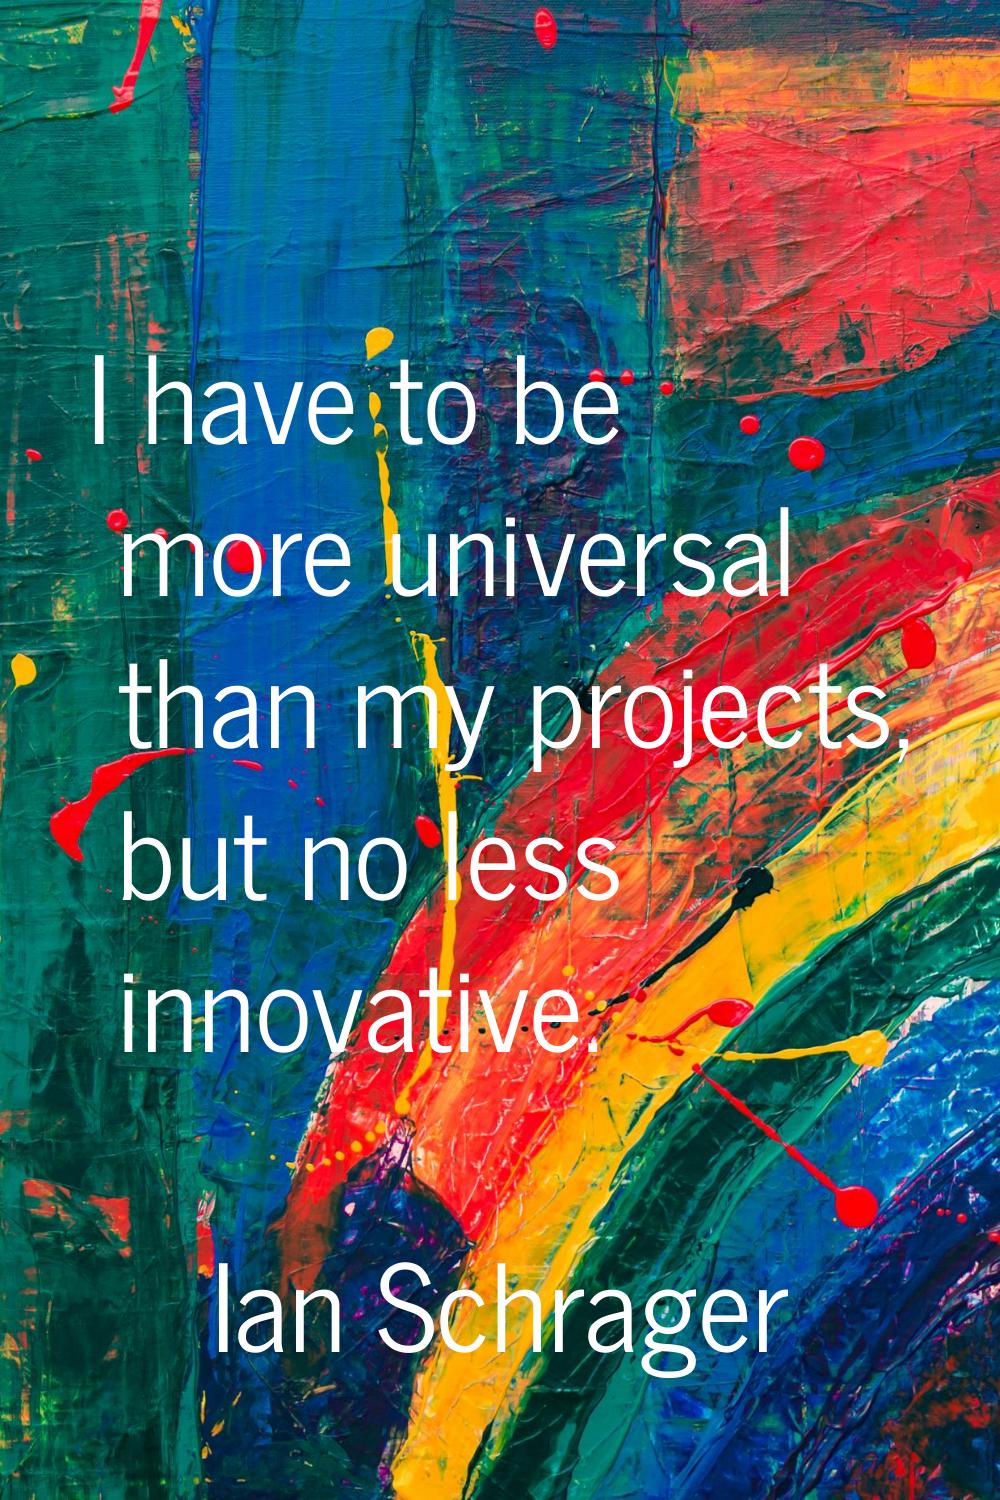 I have to be more universal than my projects, but no less innovative.